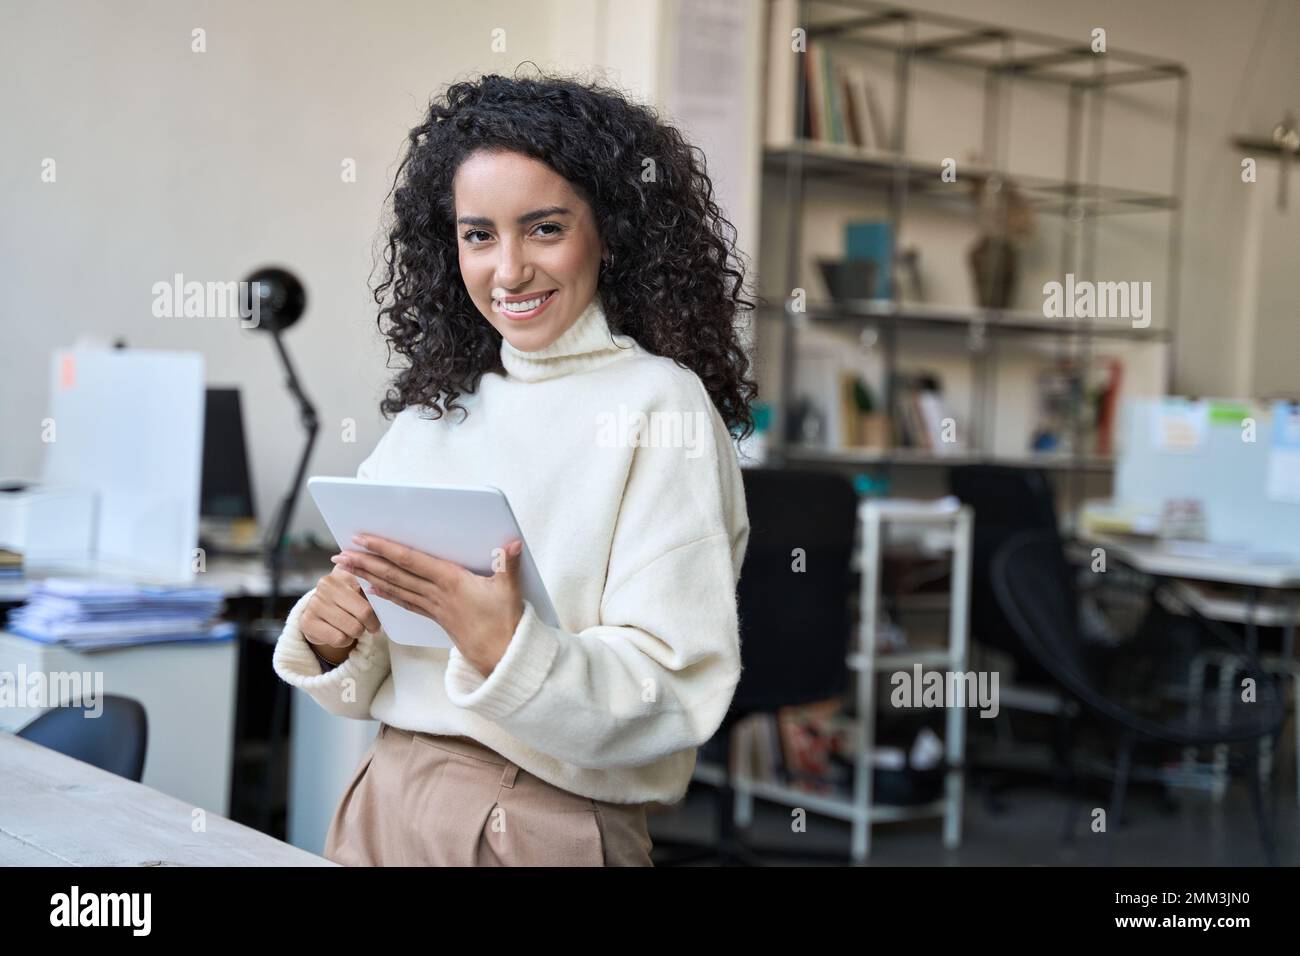 Smiling latin young professional business woman using digital tablet in office. Stock Photo